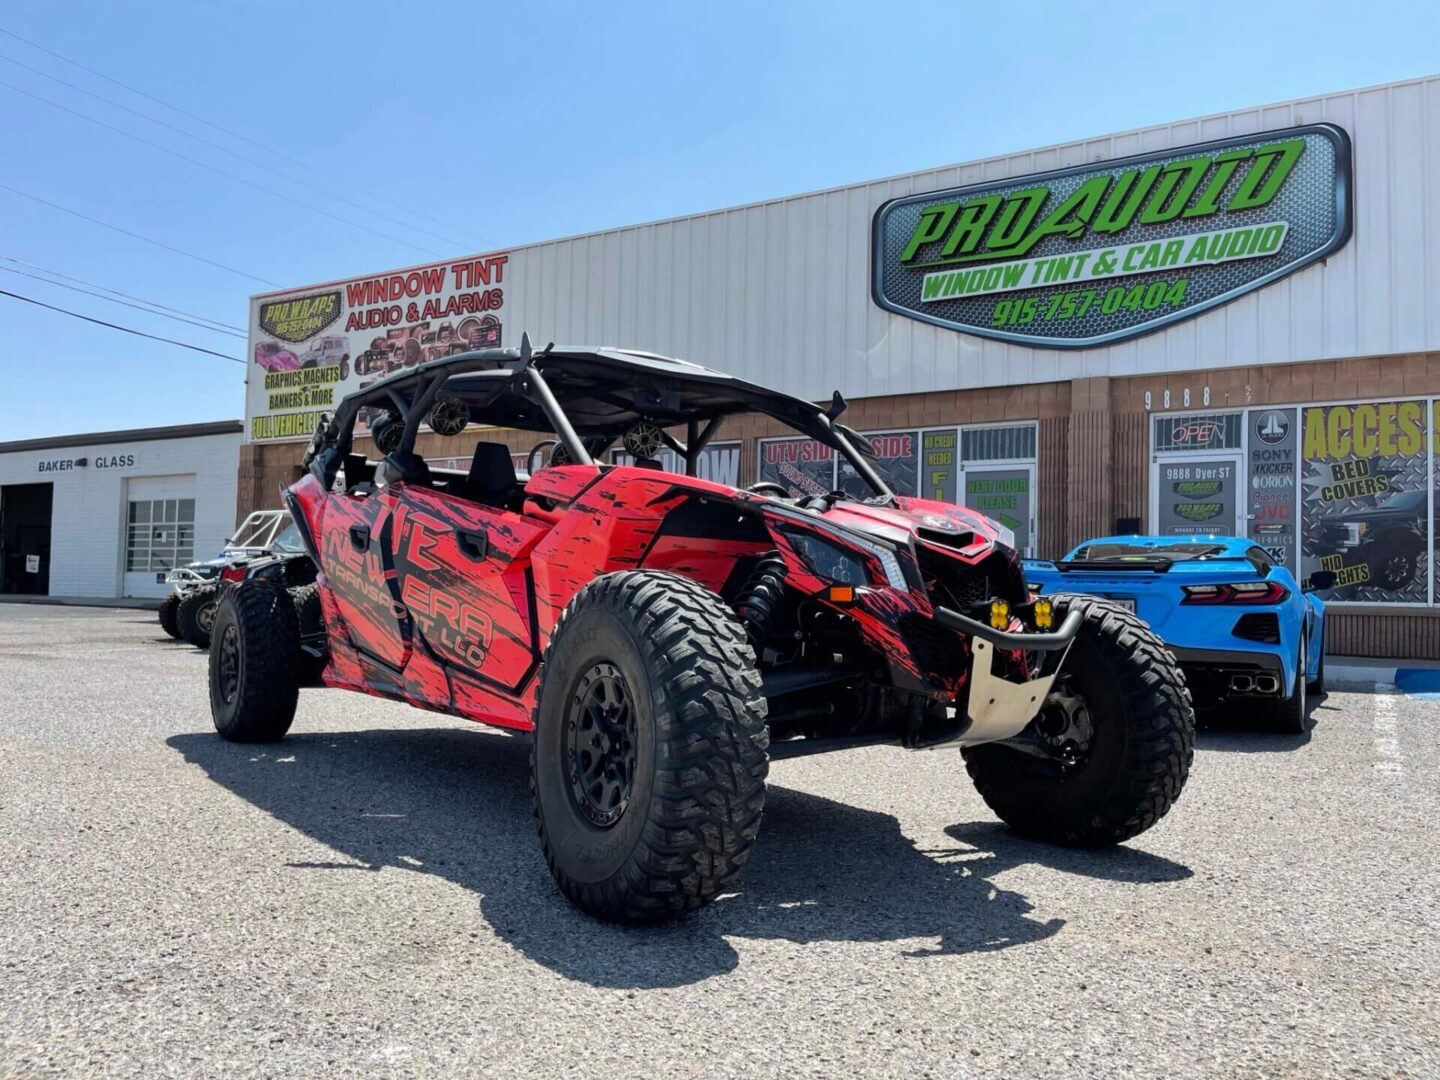 Updated RZR In Red and Black Color